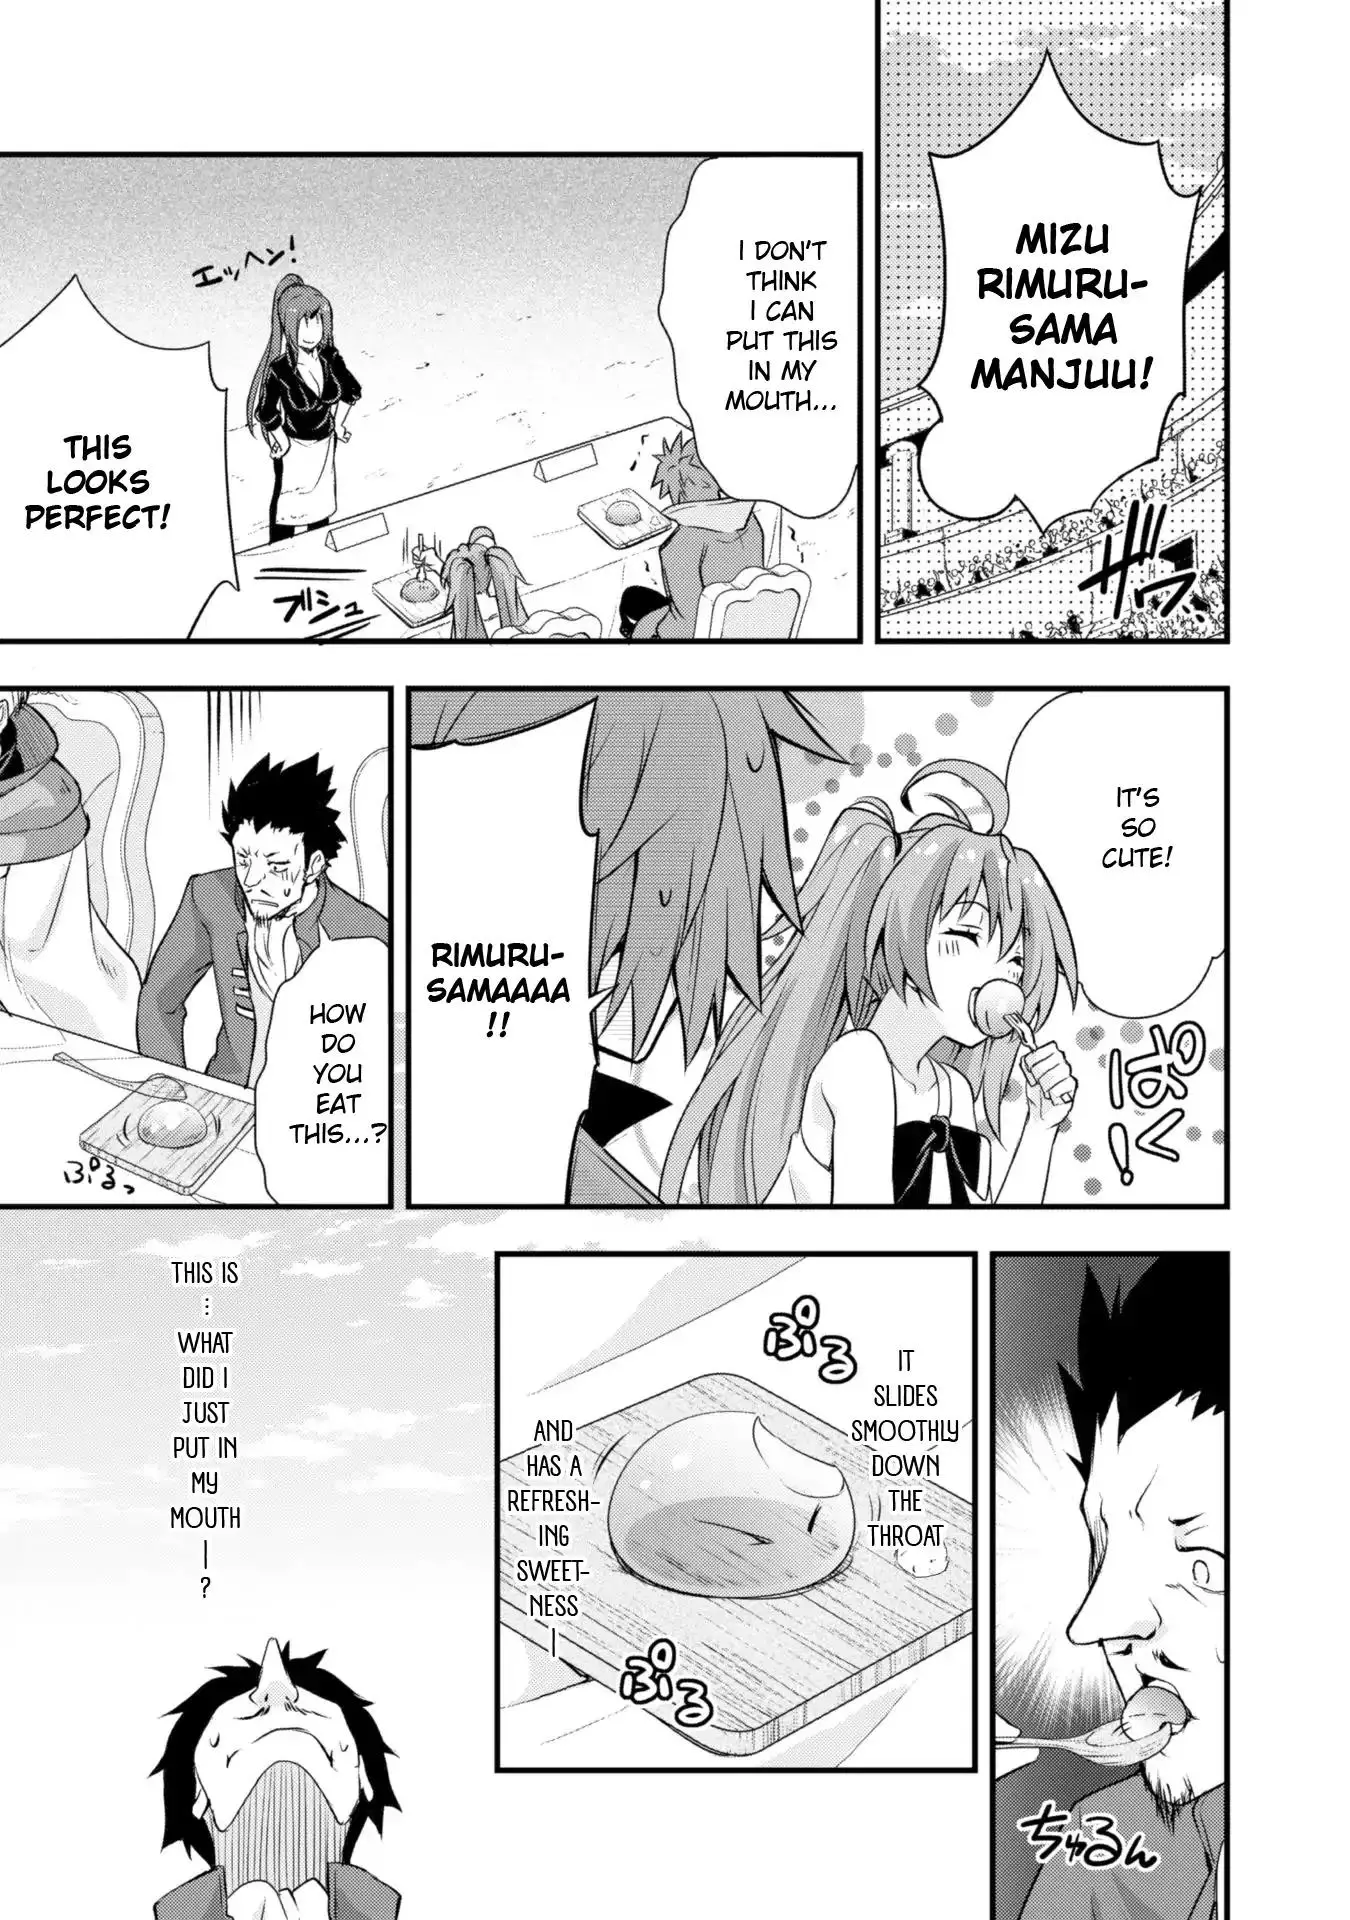 Tensei Shitara Slime Datta Ken: The Ways of Strolling in the Demon Country - 18 page 16